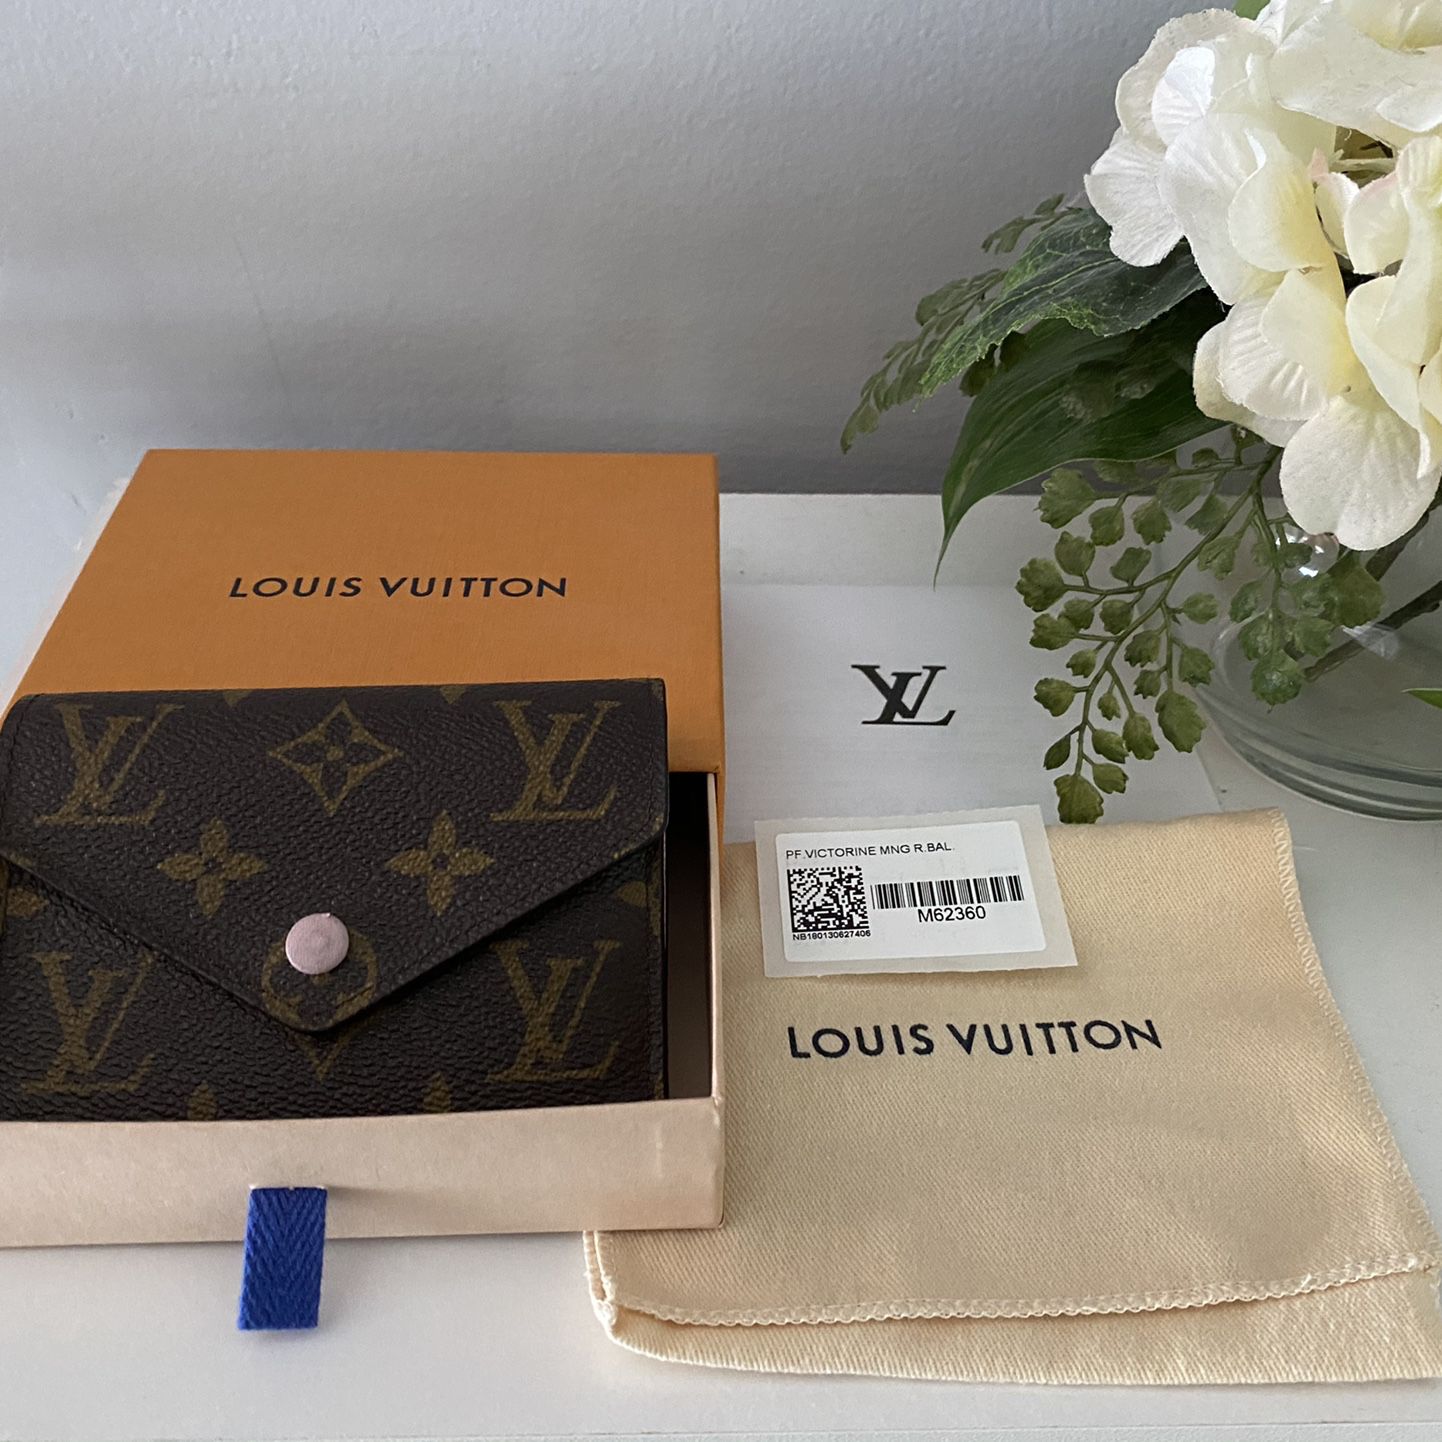 Authentic Lv wallet date code SD 0187 for Sale in Oakland, CA - OfferUp